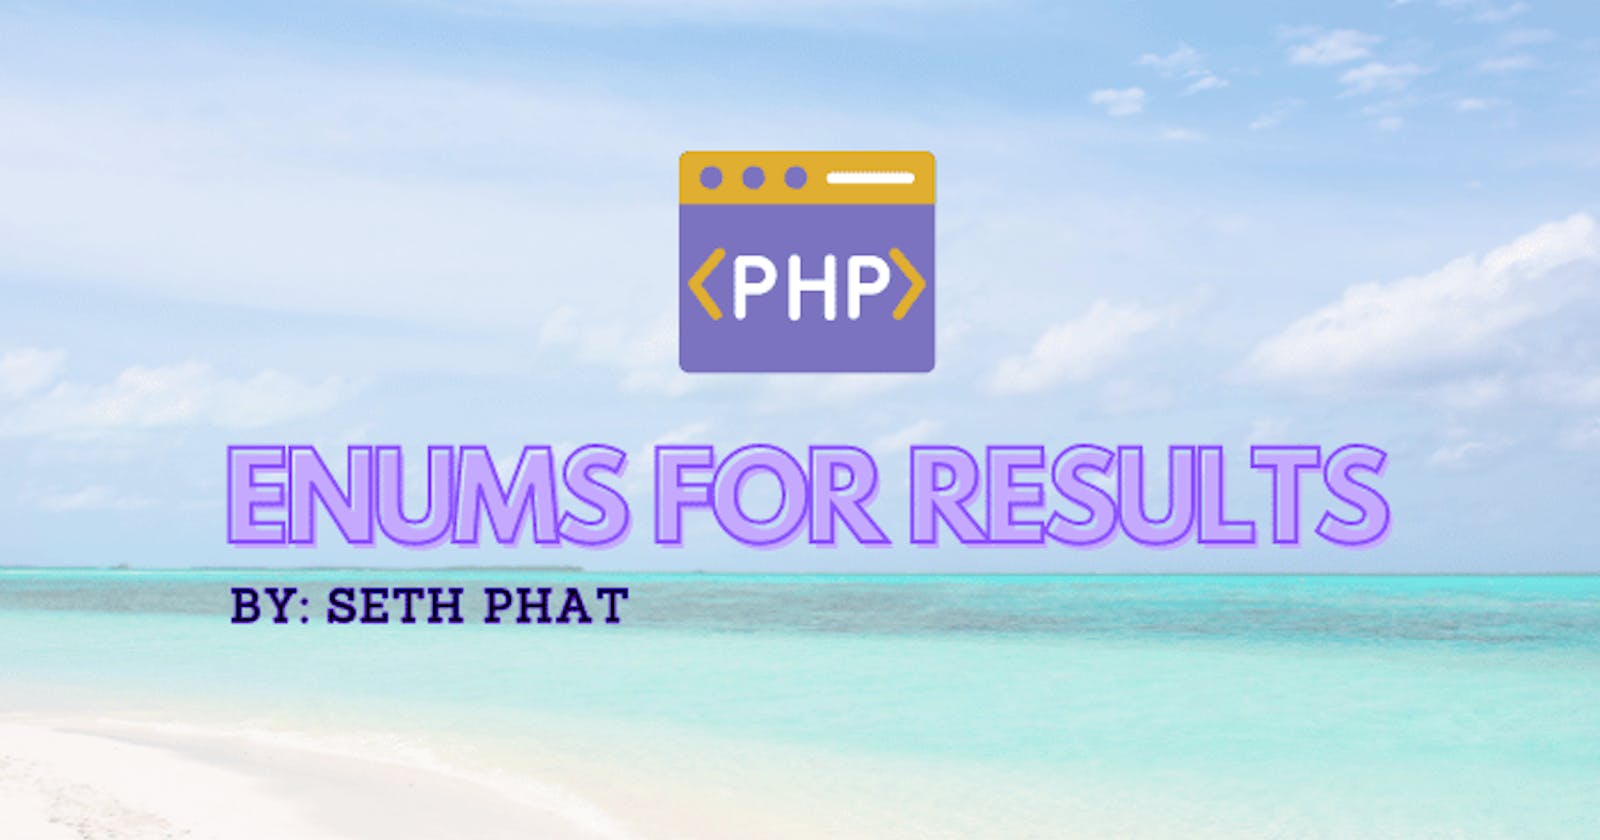 How about using PHP Enums for Results?